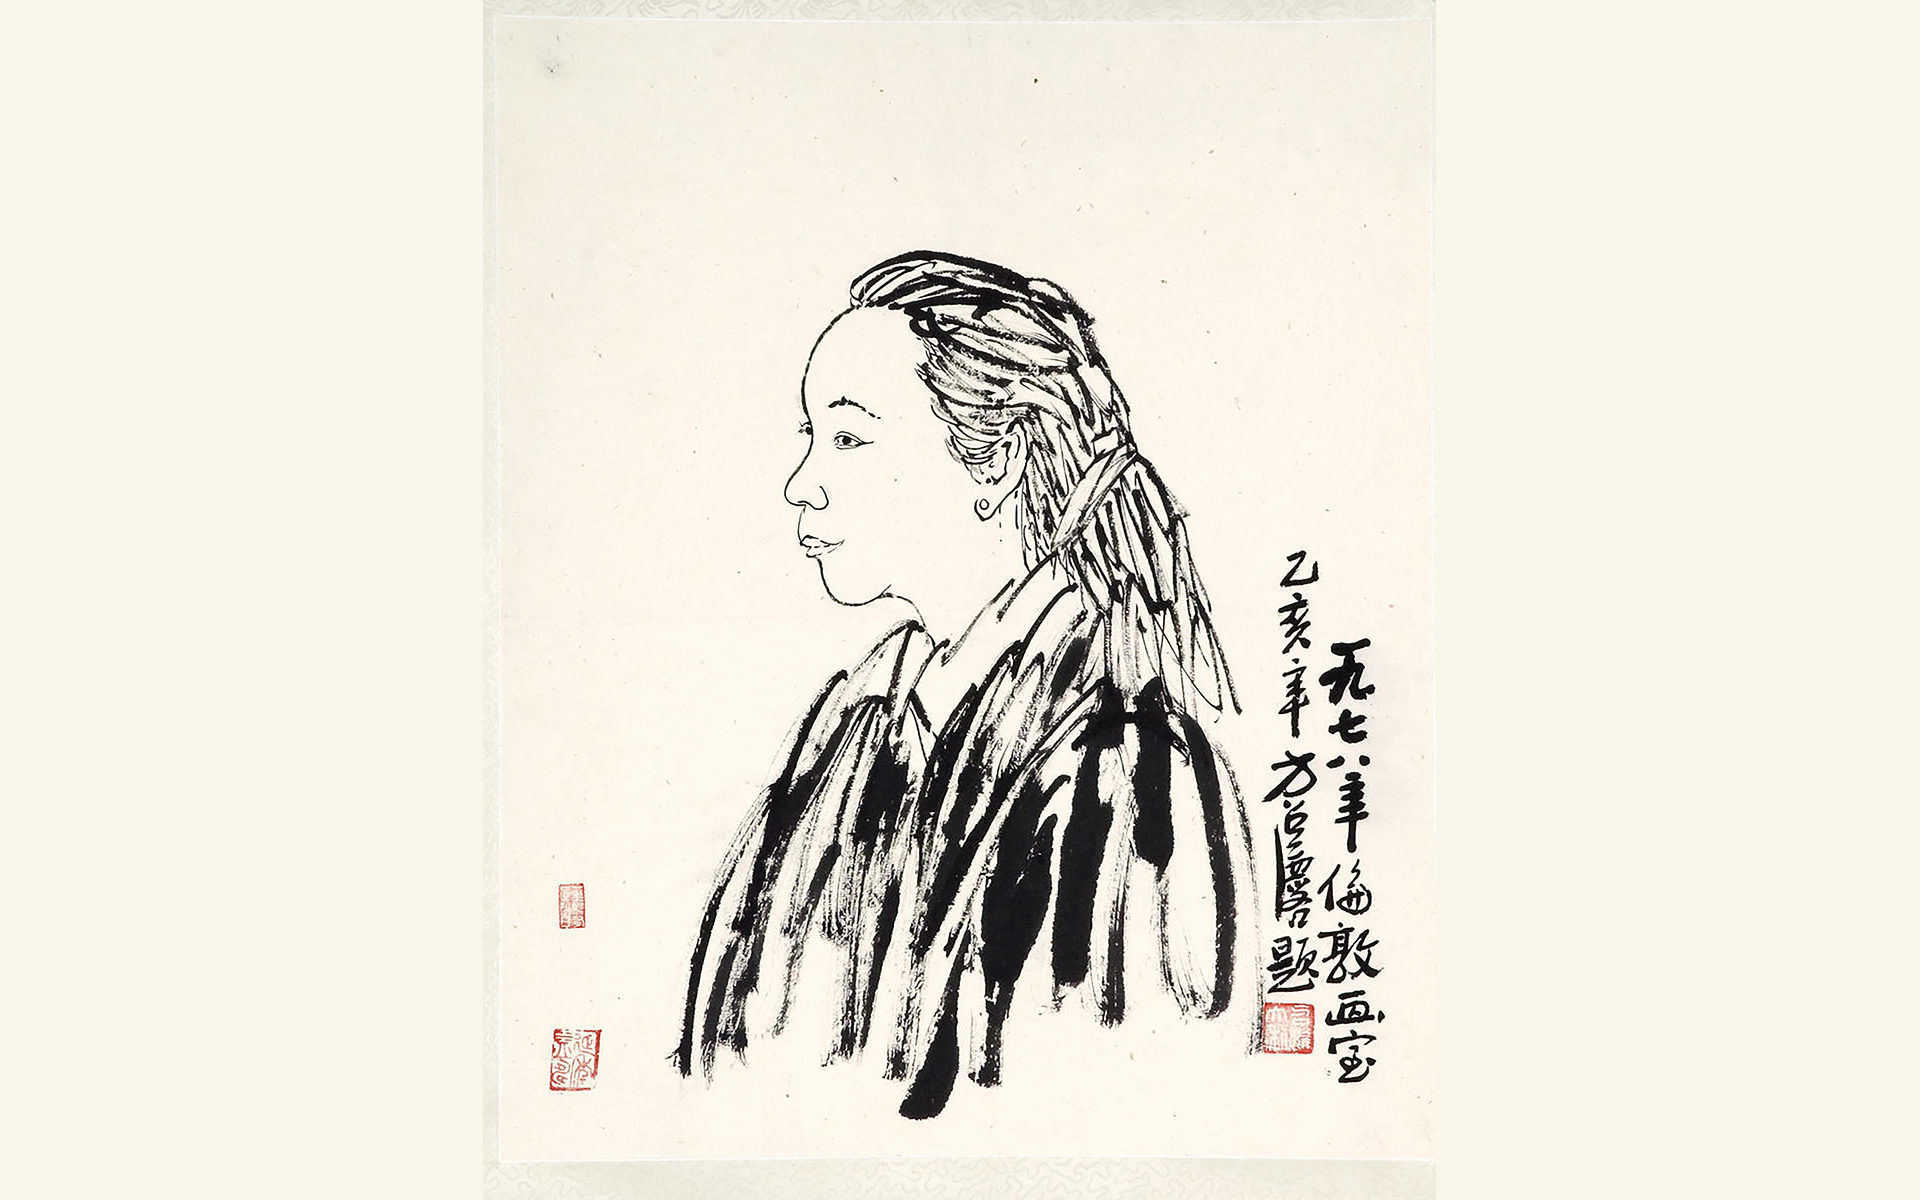 Black ink on cream paper portrait using calligraphic strokes of a woman in profile with long hair tied in a loose pony tail.